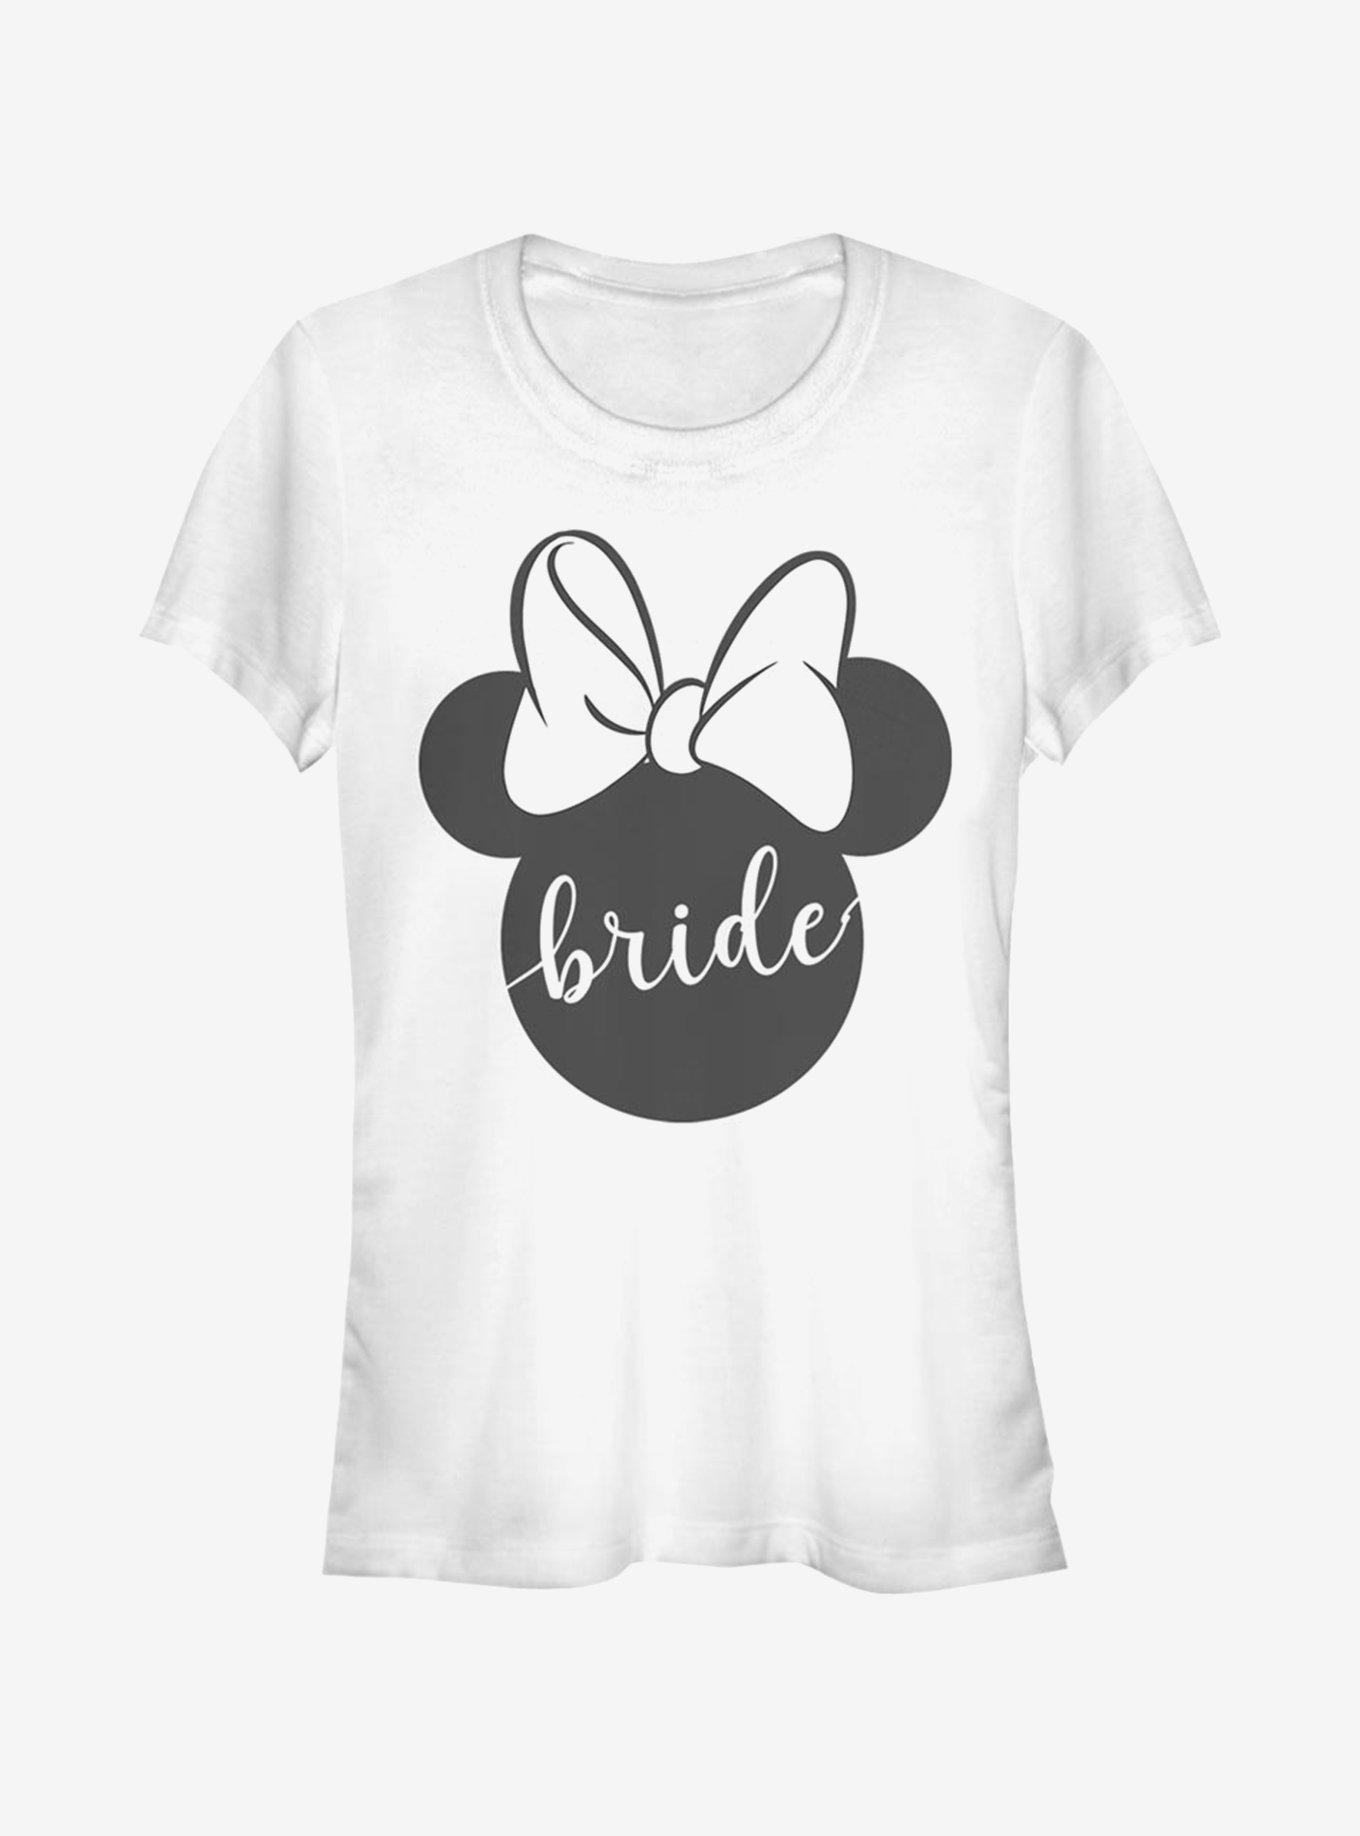 Disney Mickey Mouse Bow Bride Girls T-Shirt, WHITE, hi-res